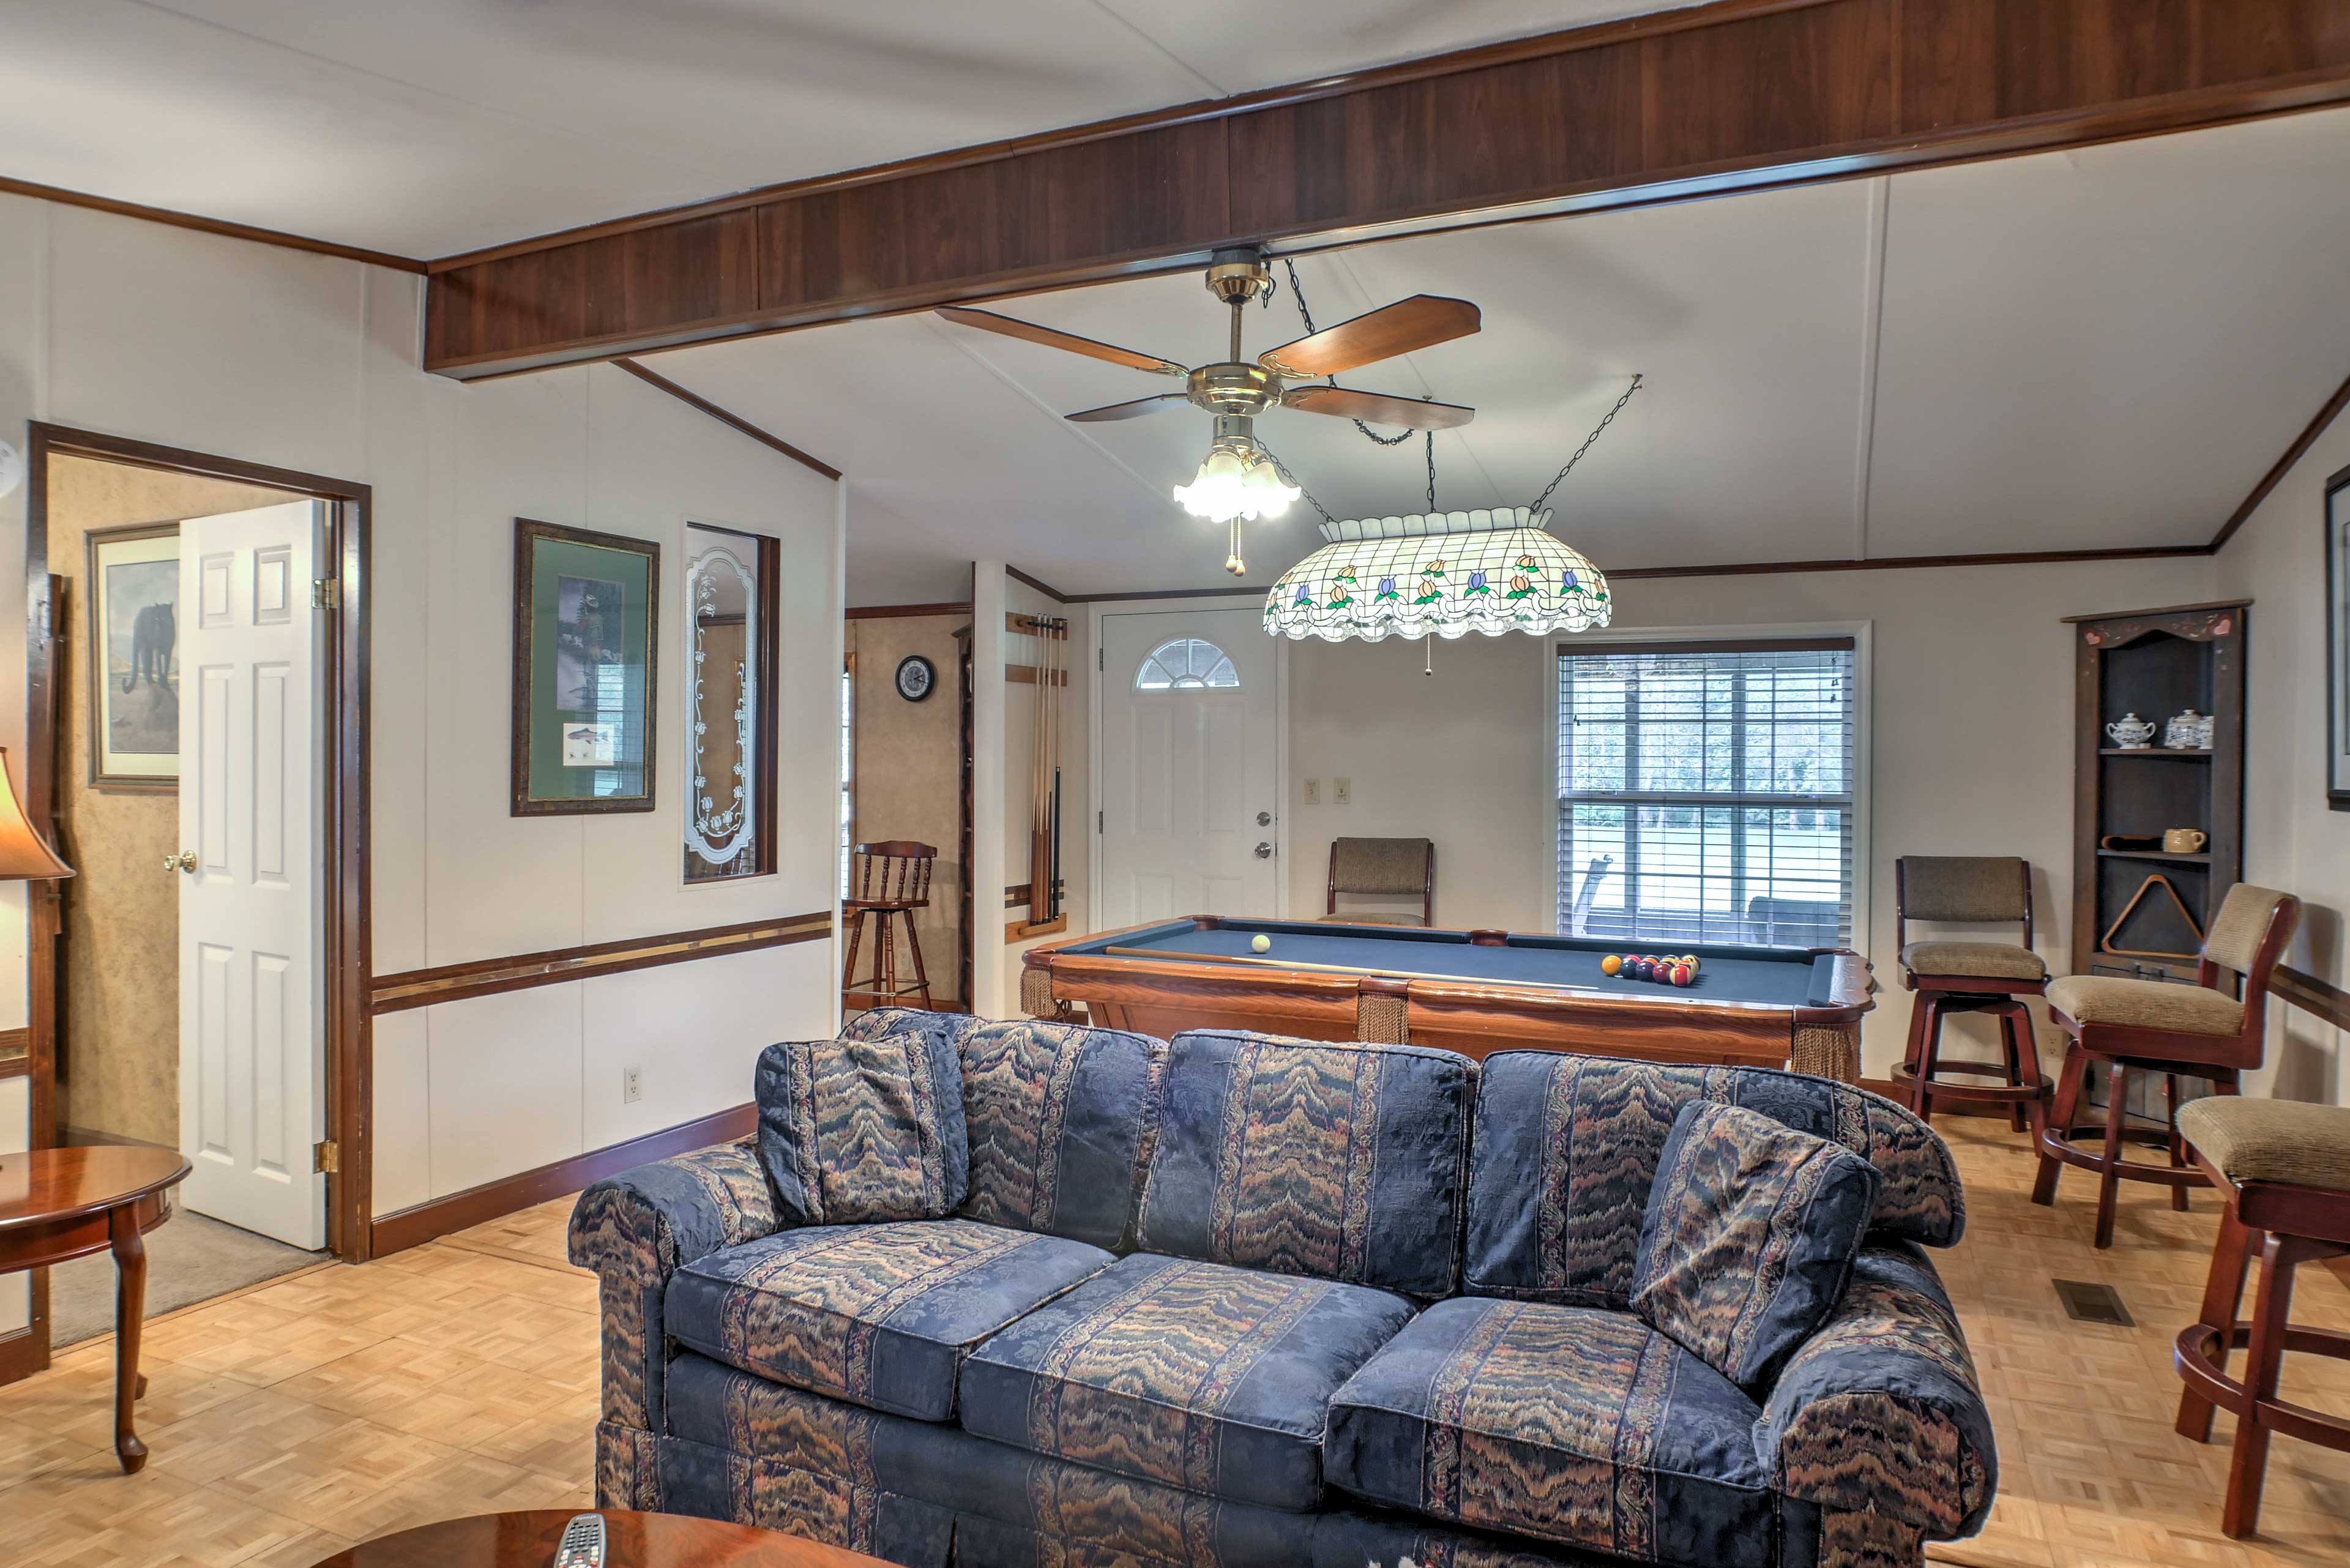 Ooltewah Cabin w/ Grill, Pool Table & Porch!